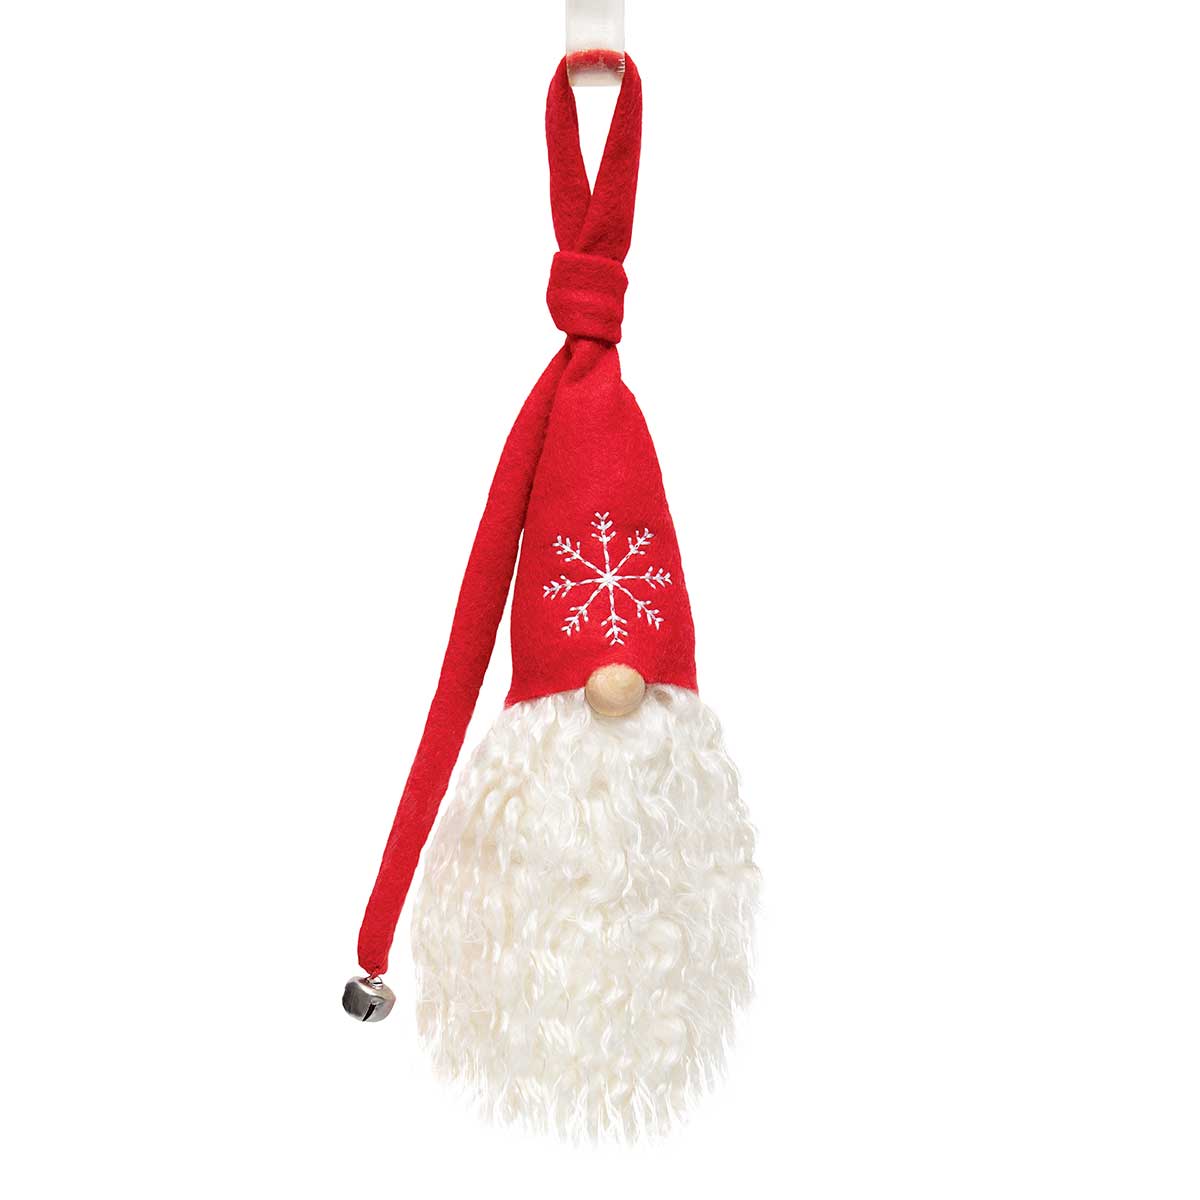 !PIERRE' NOEL GNOME RED WITH JINGLE BELL, SNOWFLAKE b50